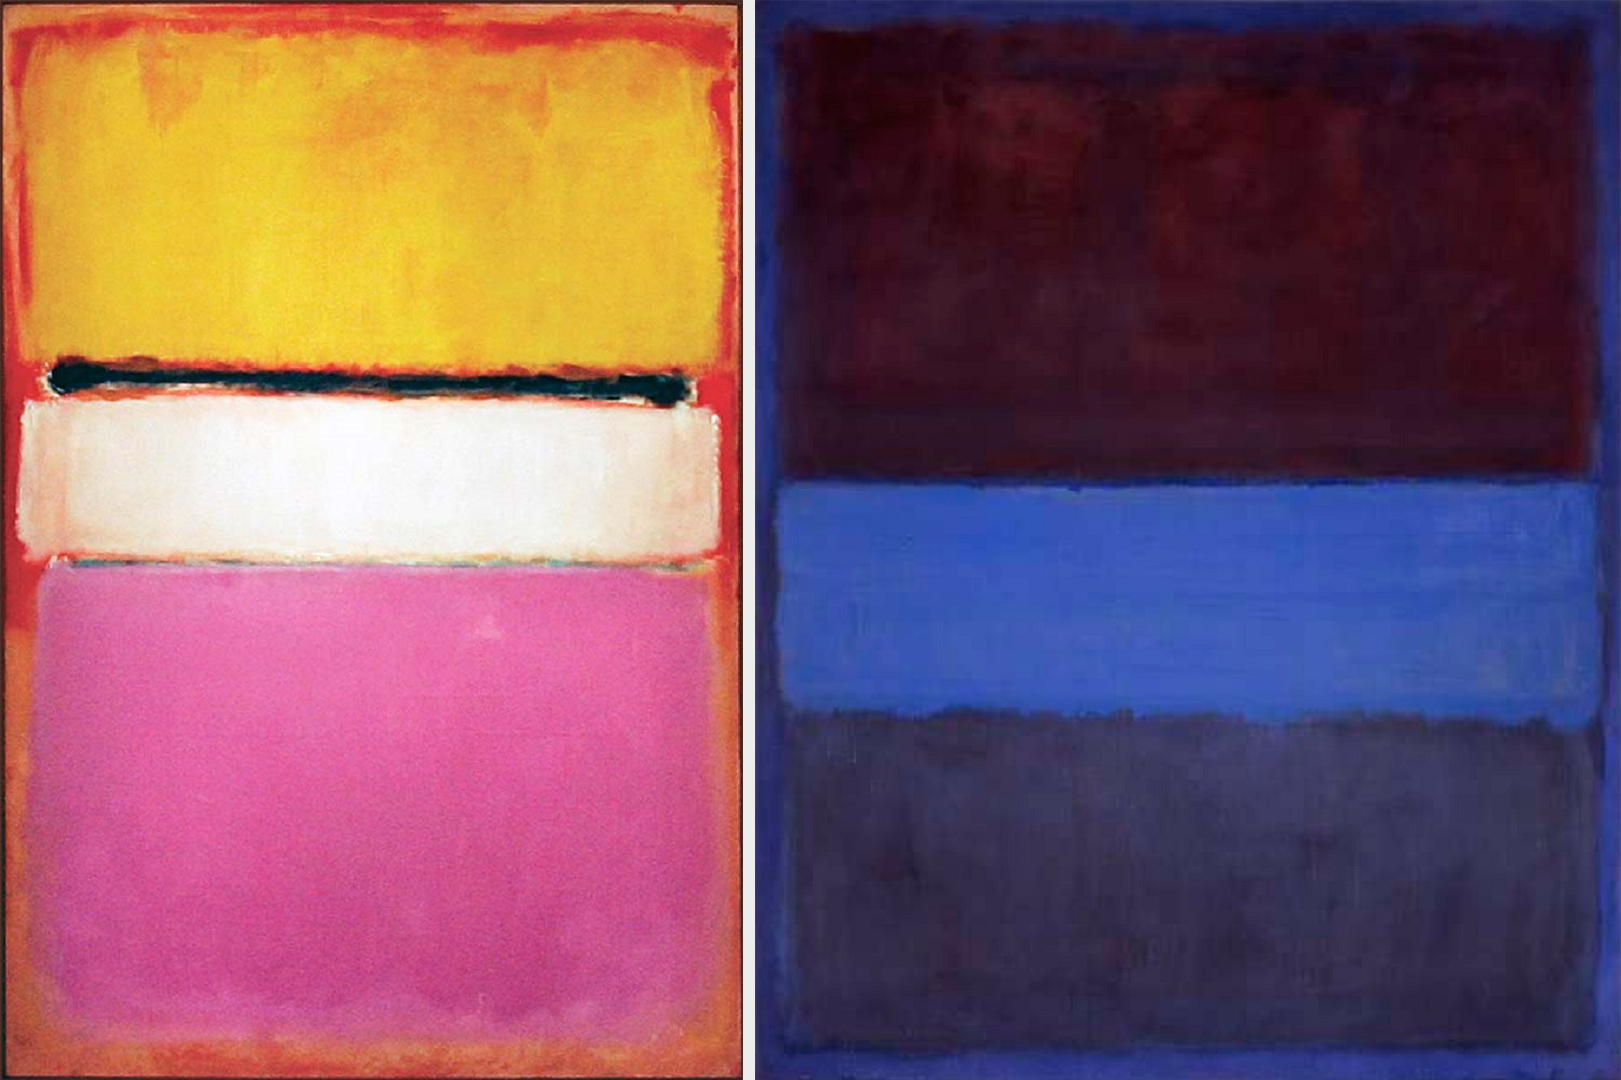 ROTHKO ART CENTER: The Legacy of One of the Most Significant Artists of the 20th Century